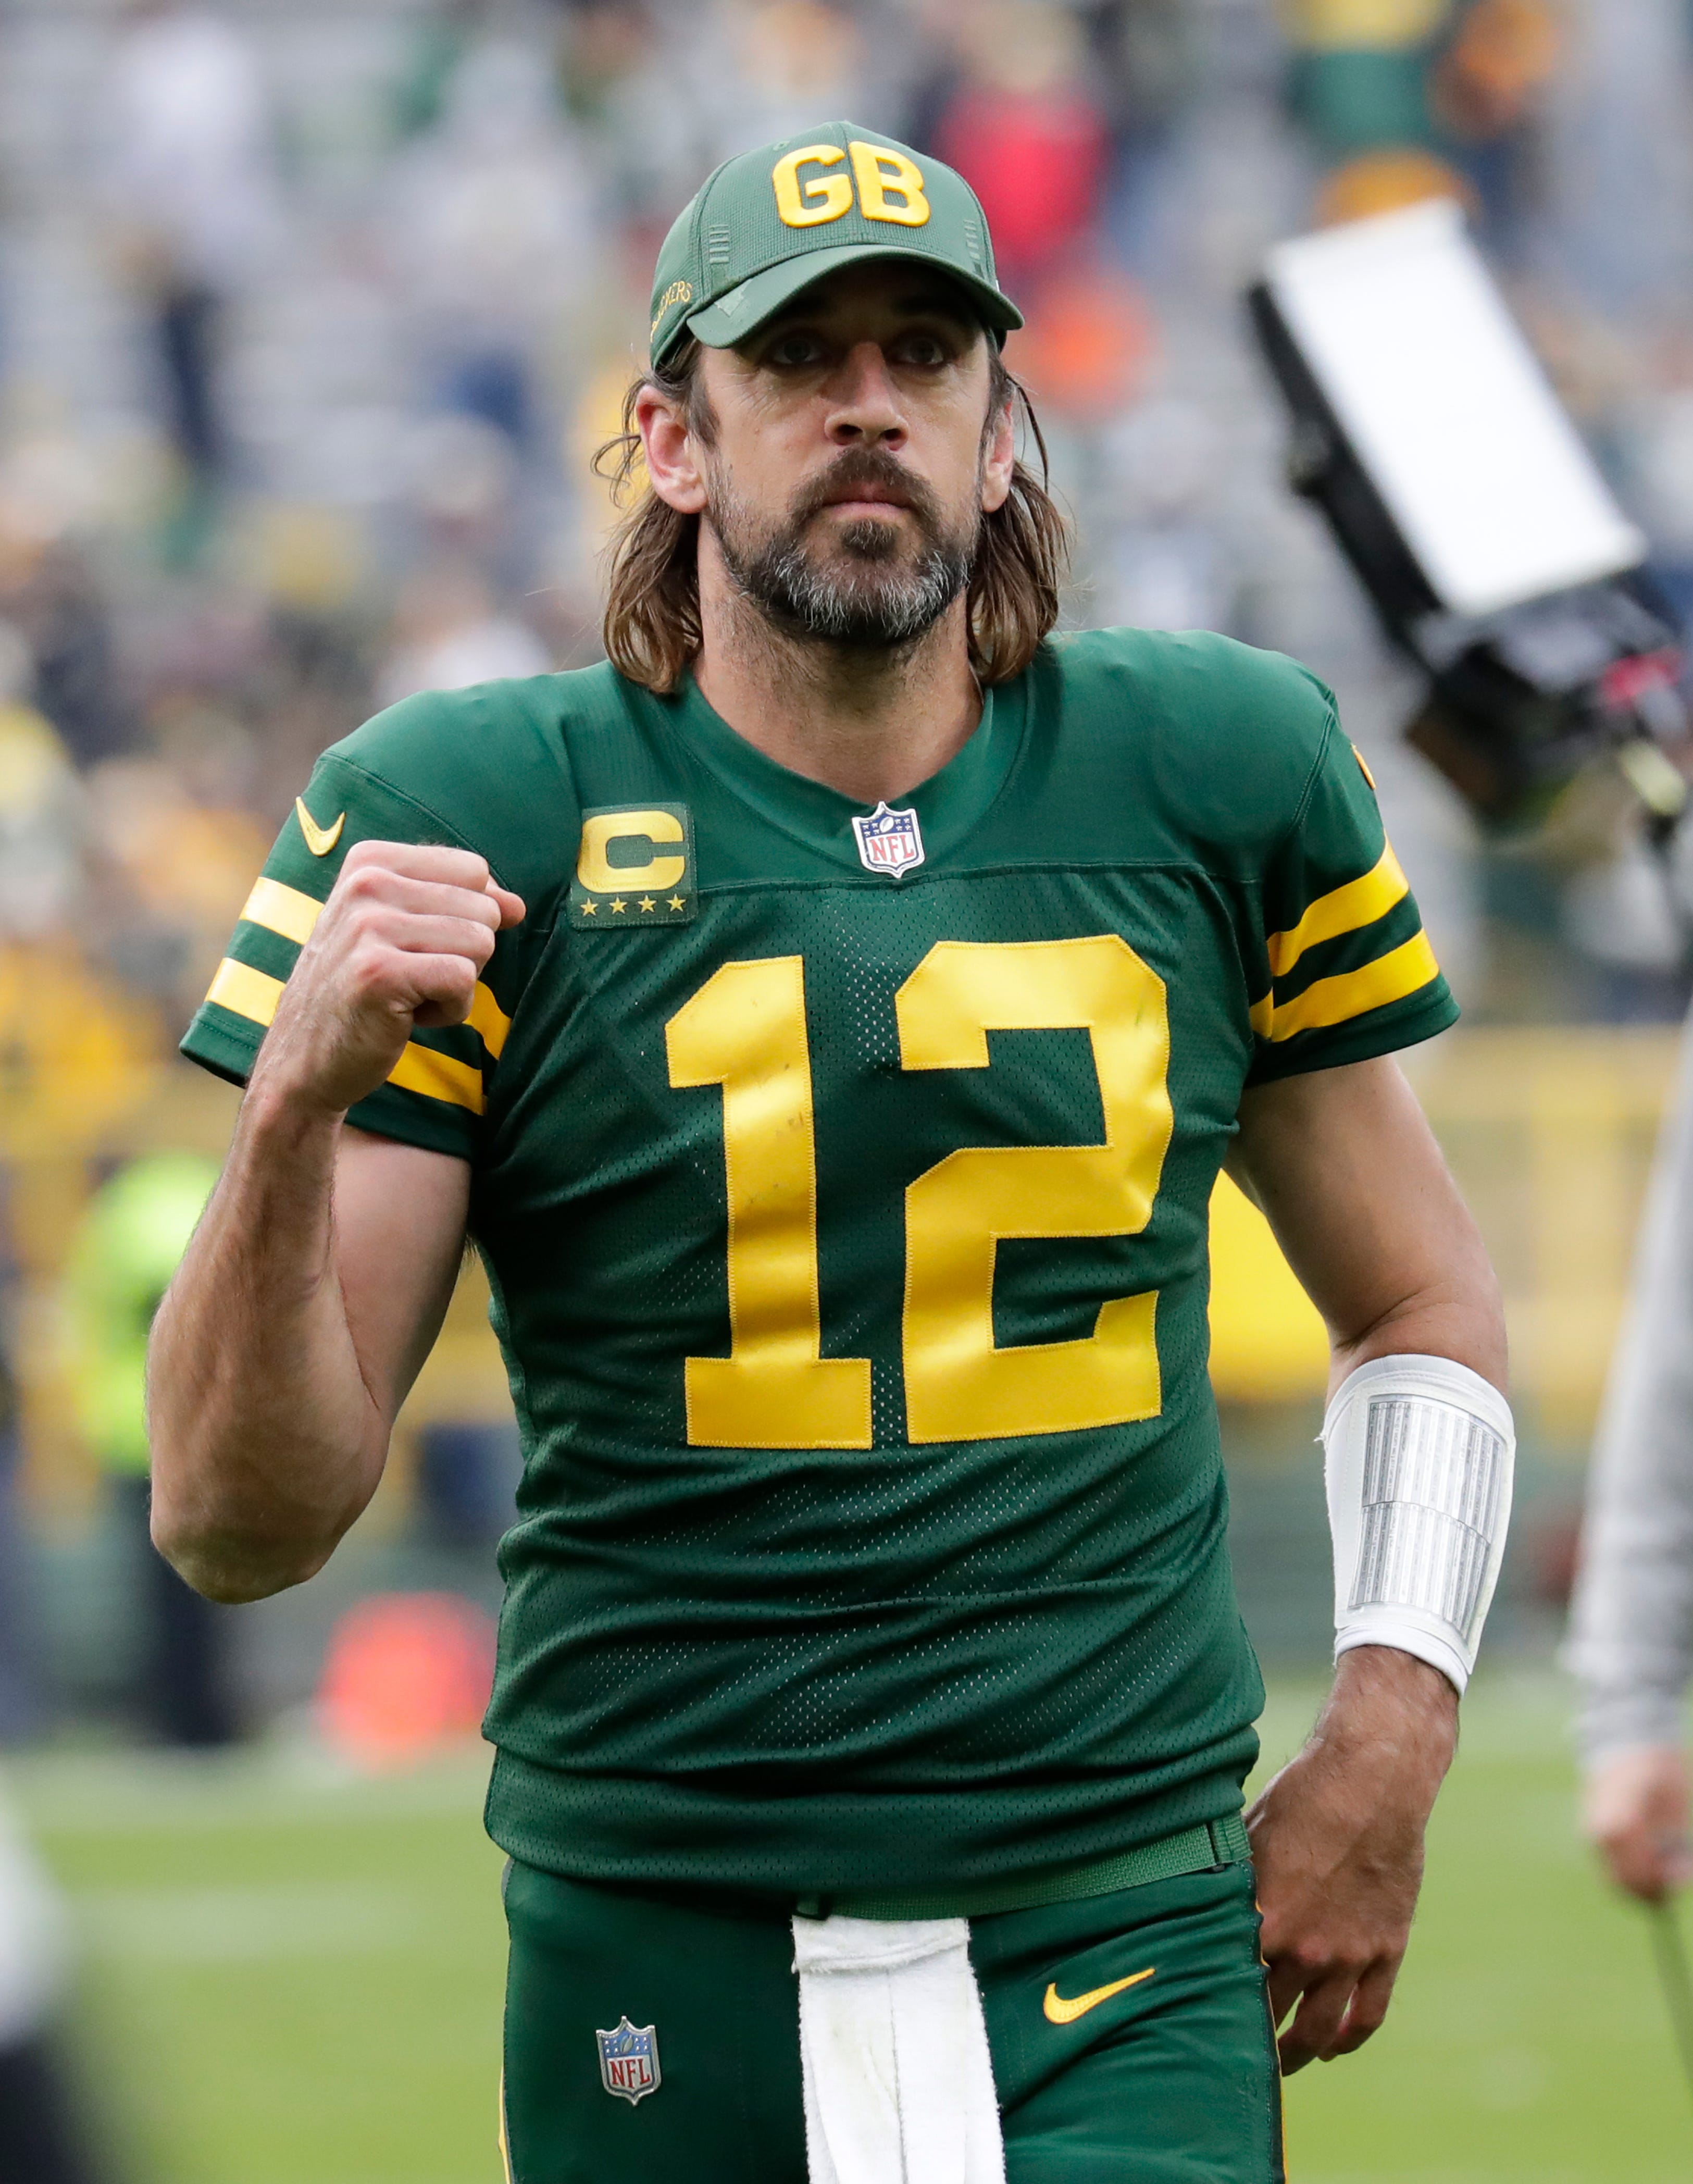 Aaron Rodgers confirms he's unvaccinated, has taken ivermectin in first comments after testing positive for COVID-19